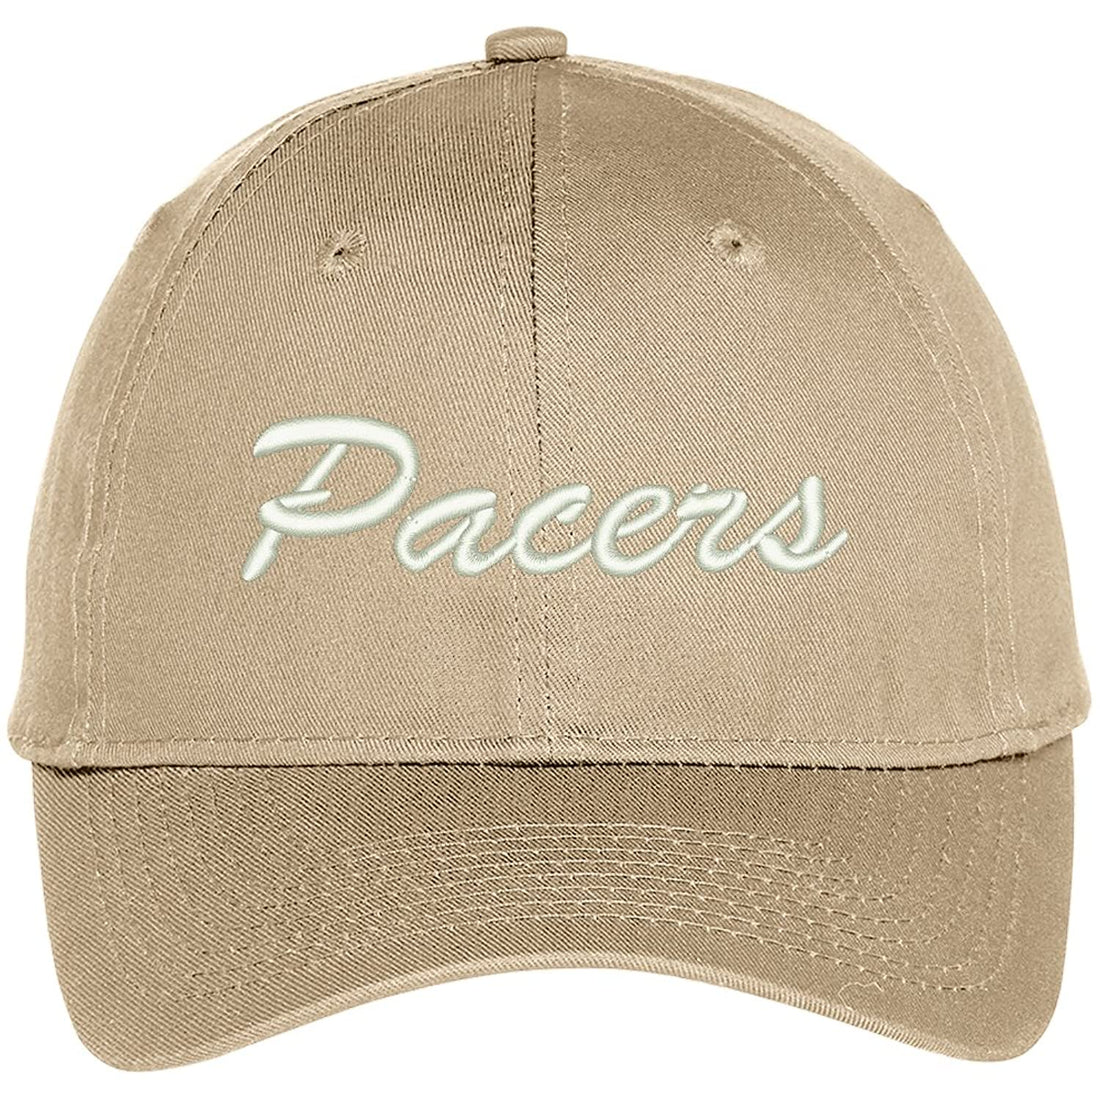 Trendy Apparel Shop Pacers Embroidered Precurved Adjustable Cap